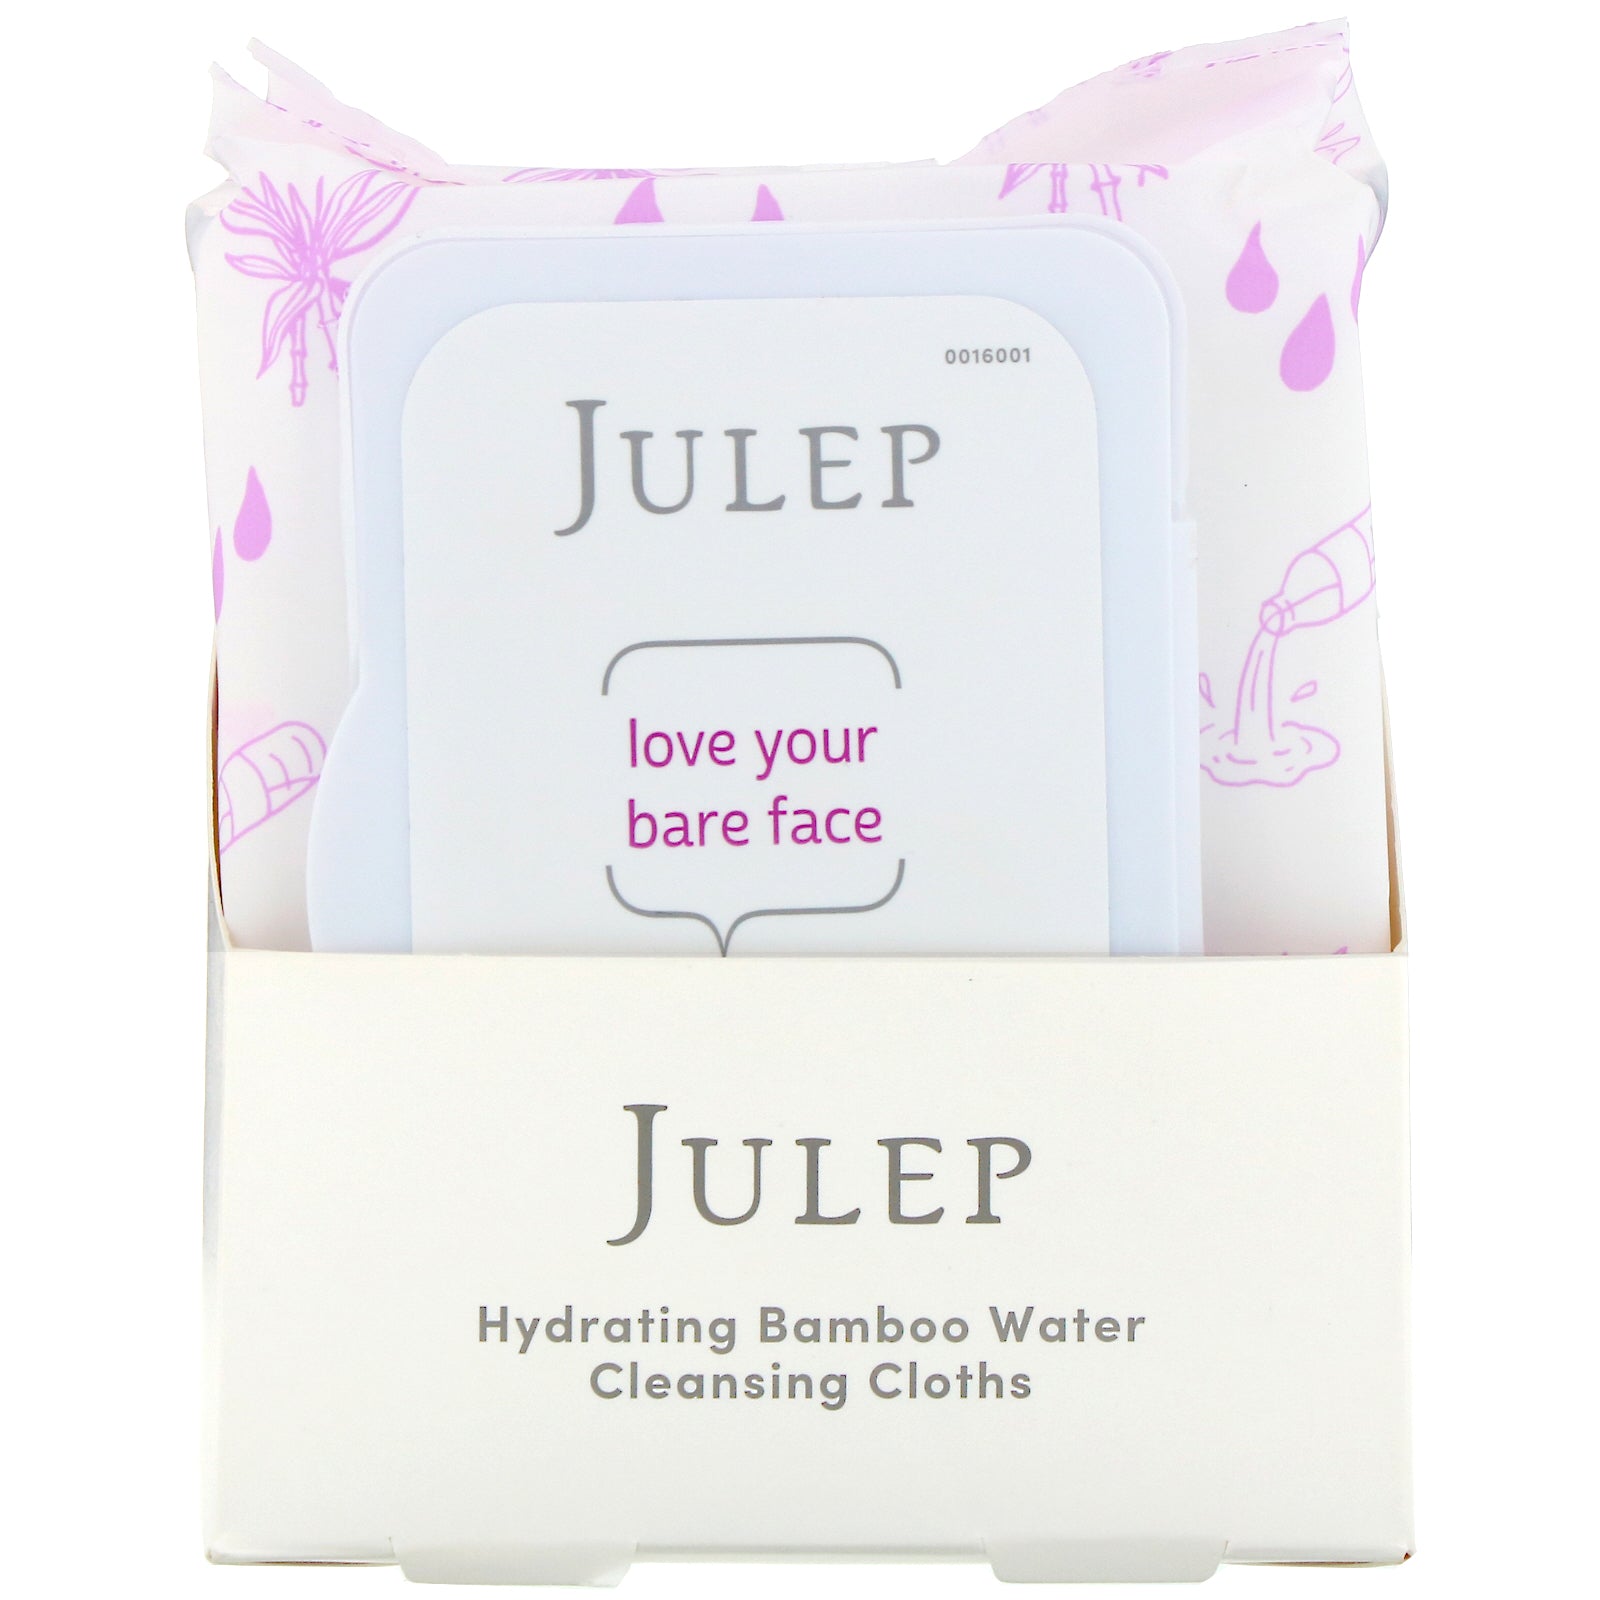 Julep, Love Your Bare Face, Hydrating Bamboo Water Cleansing Cloths, 30 Towelettes